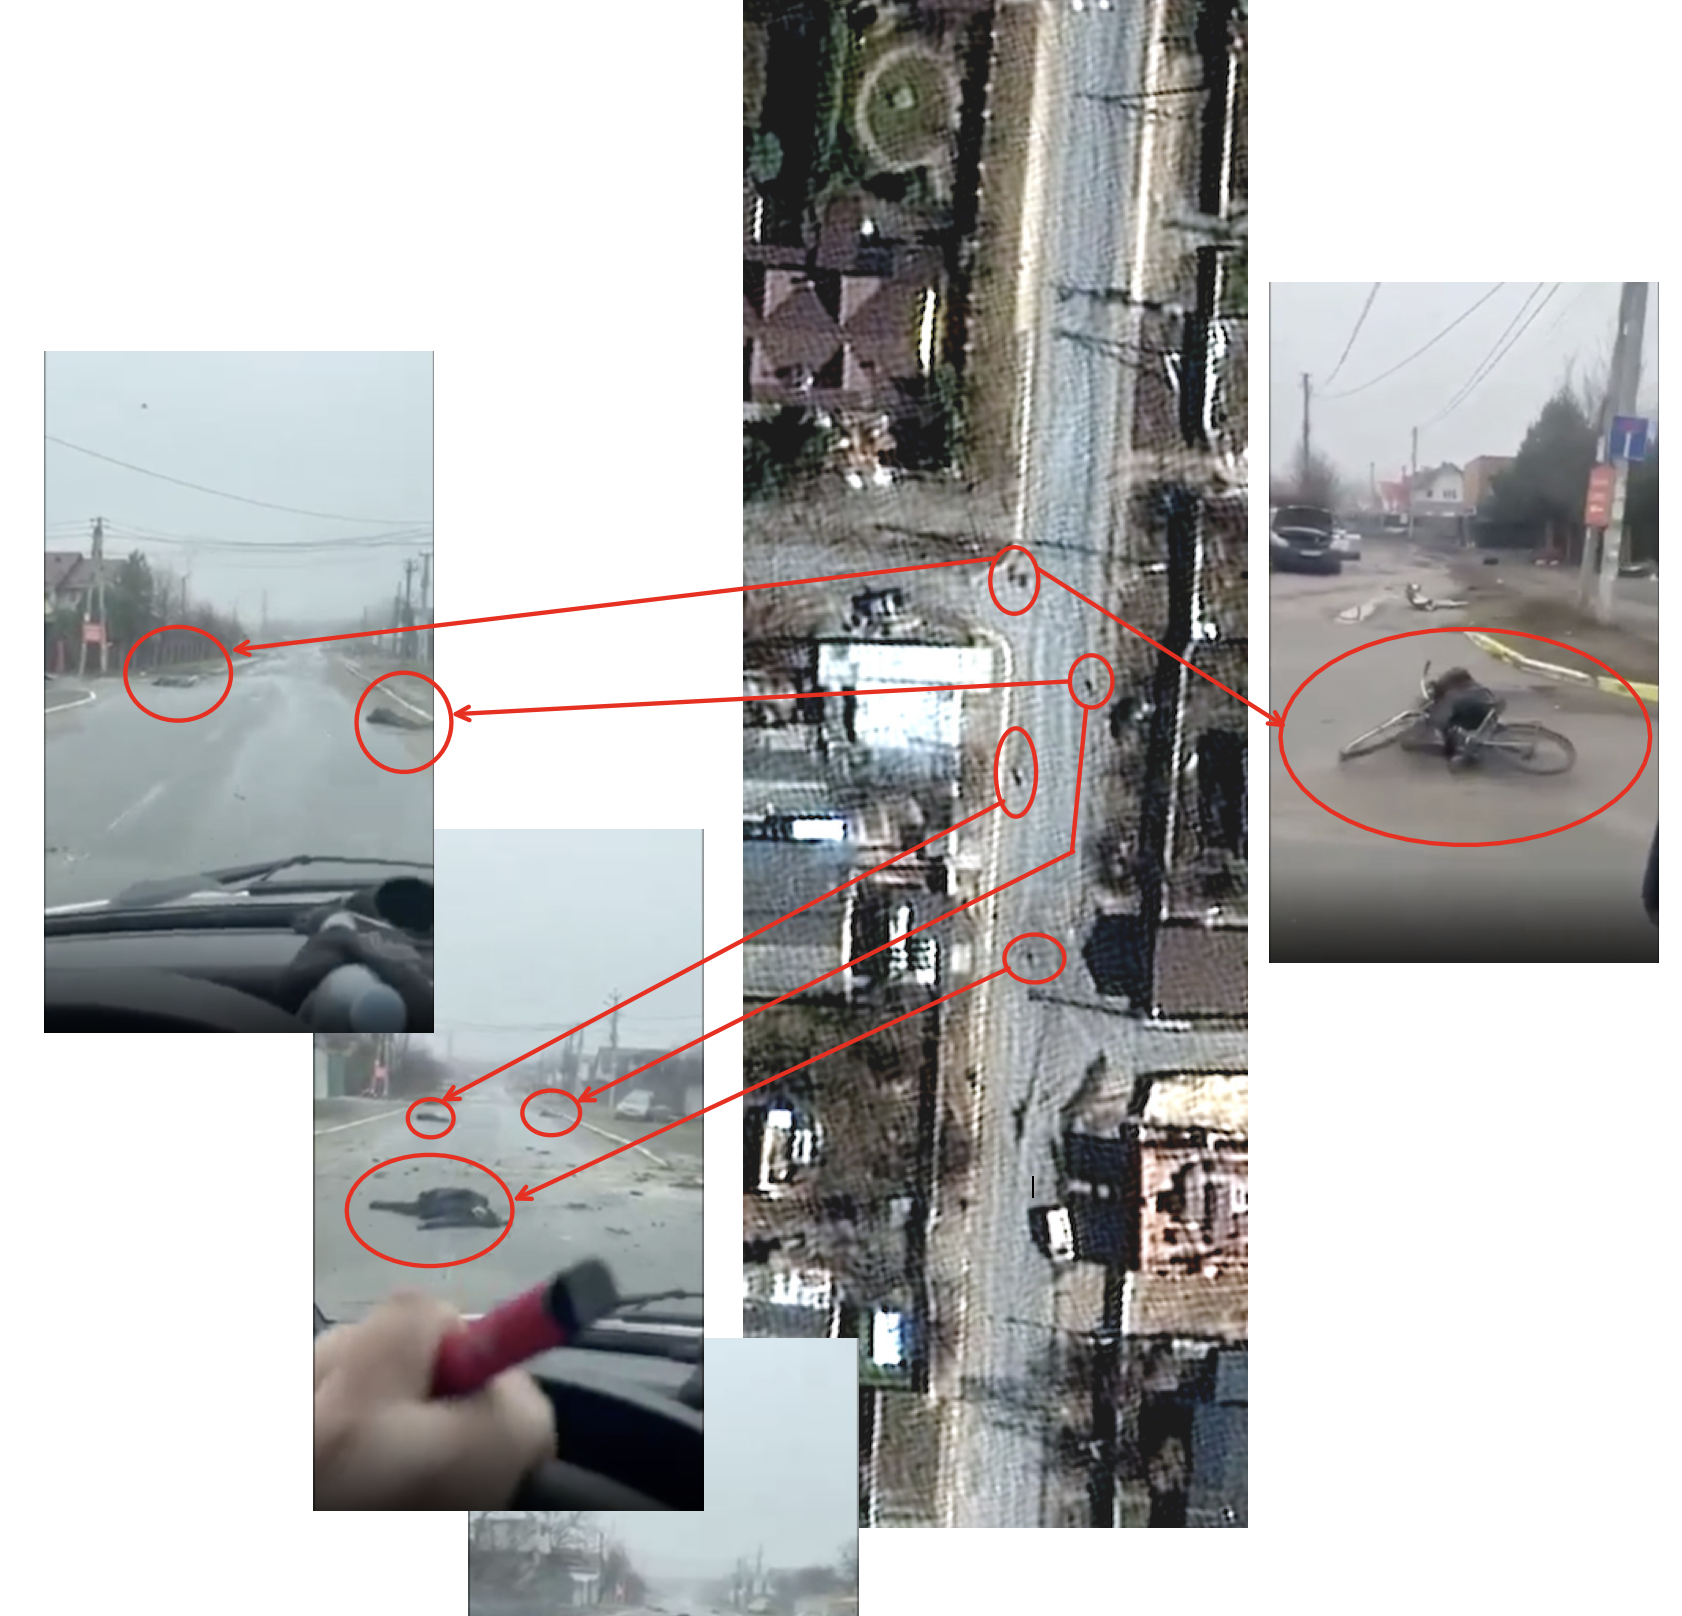 Objects seen in the street on the satellite images match the exact locations that bodies are seen in the street in the video.